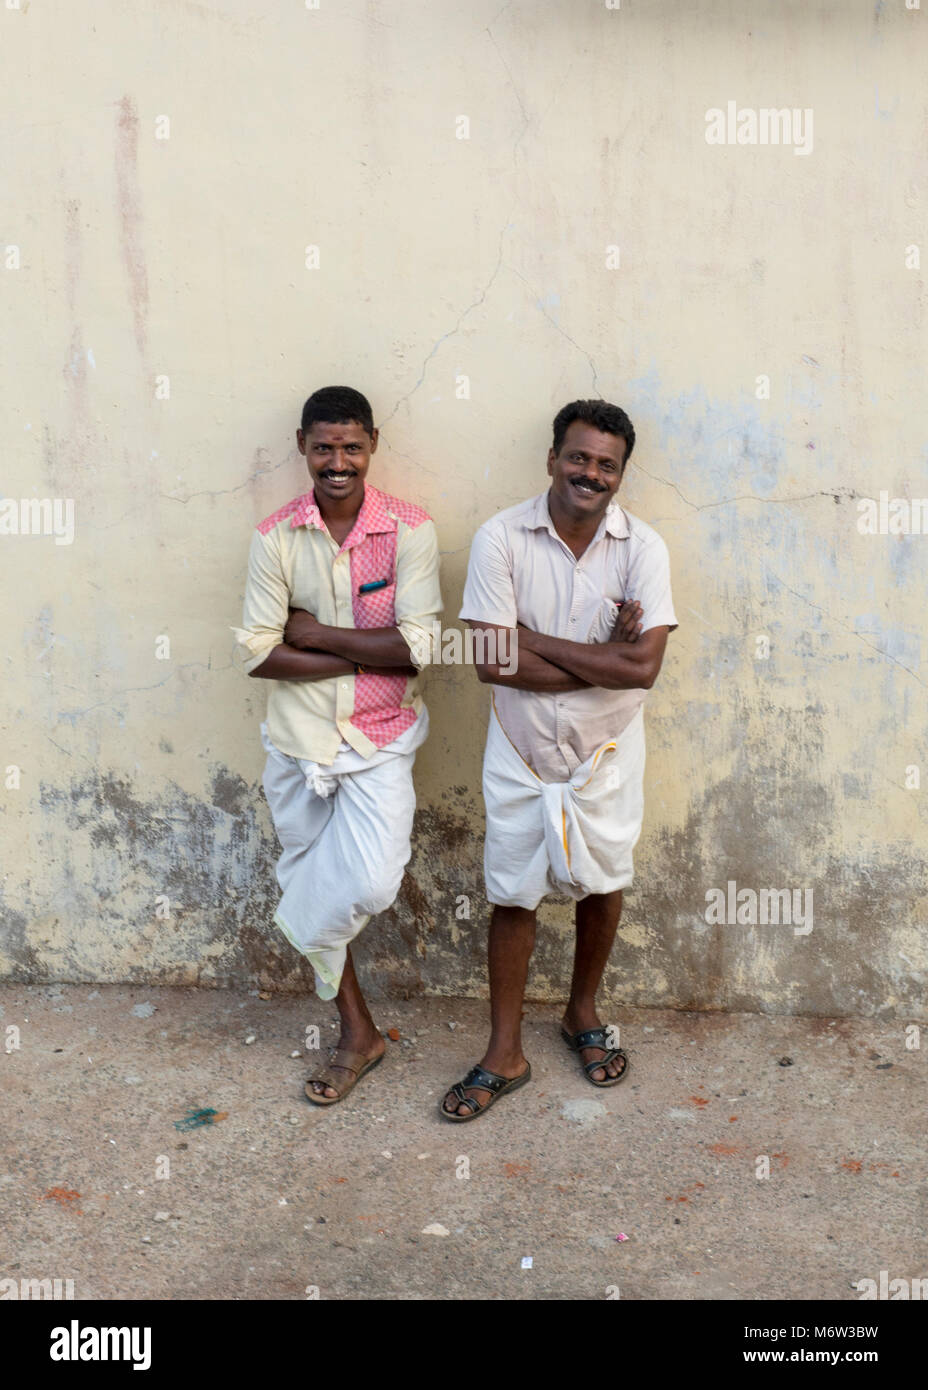 Two smiling men leaning against a wall smiling in Vizhinjam Fishing Village, Kerala, India Stock Photo